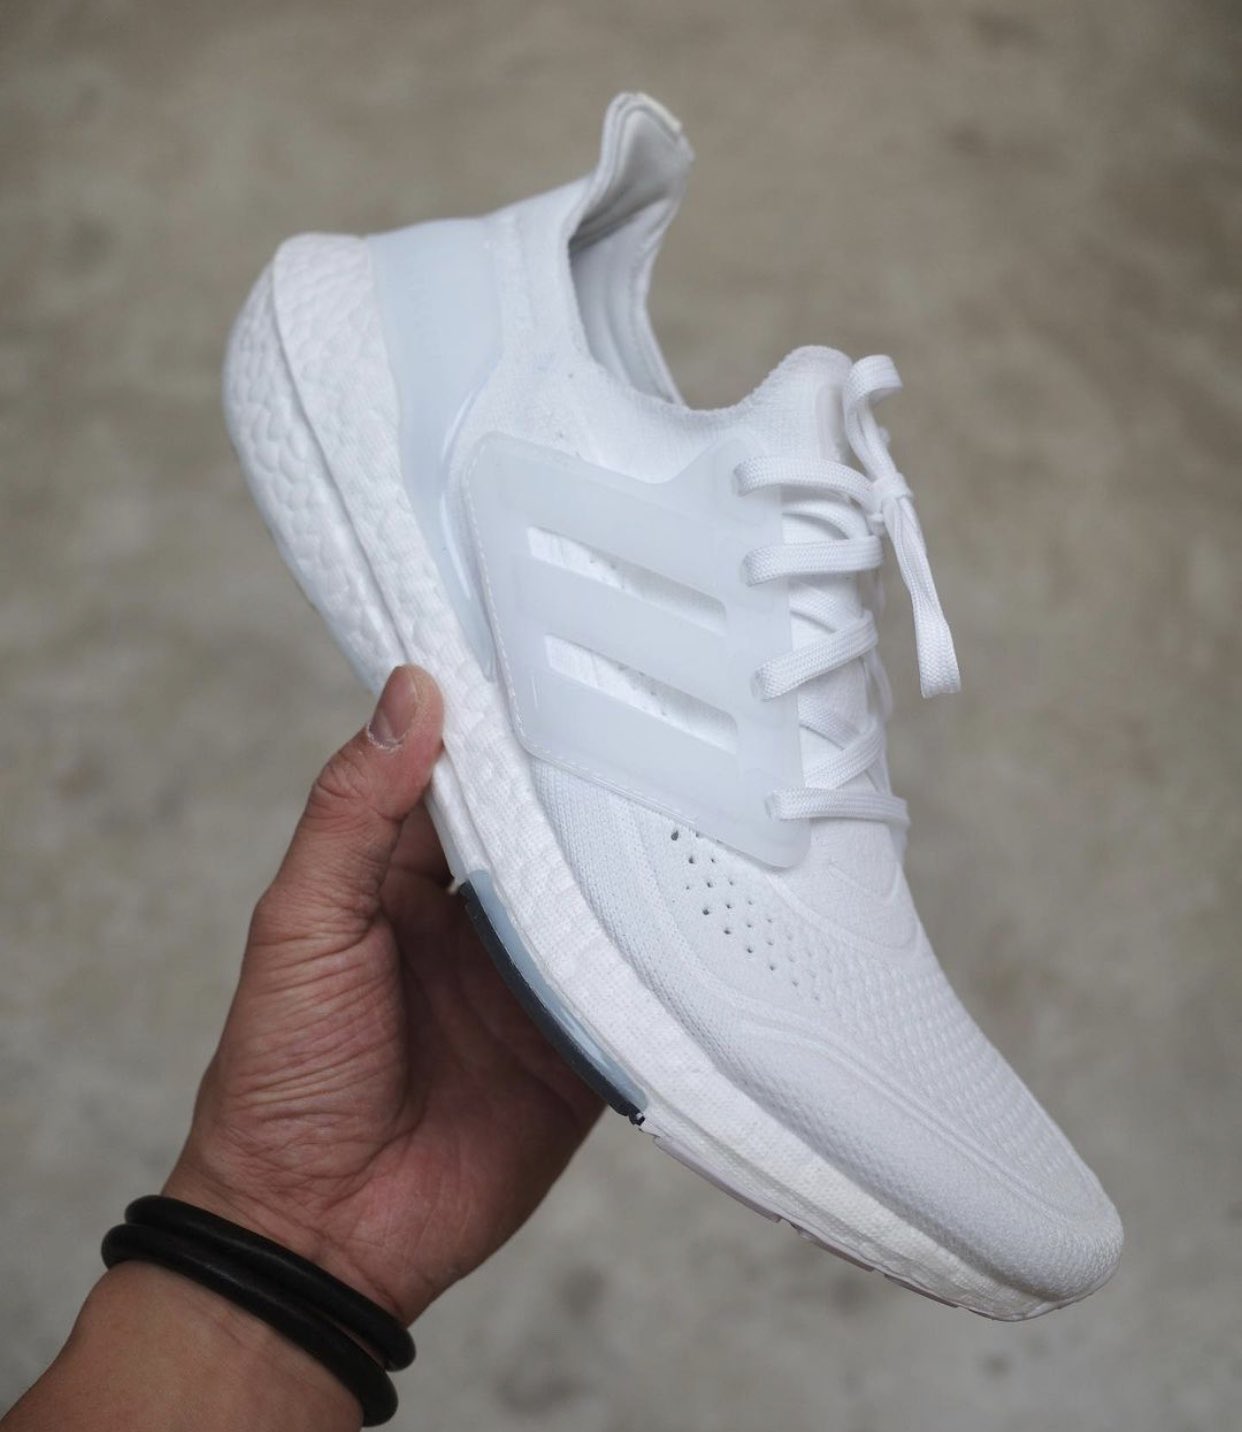 A First Look at the adidas Ultra Boost Triple White